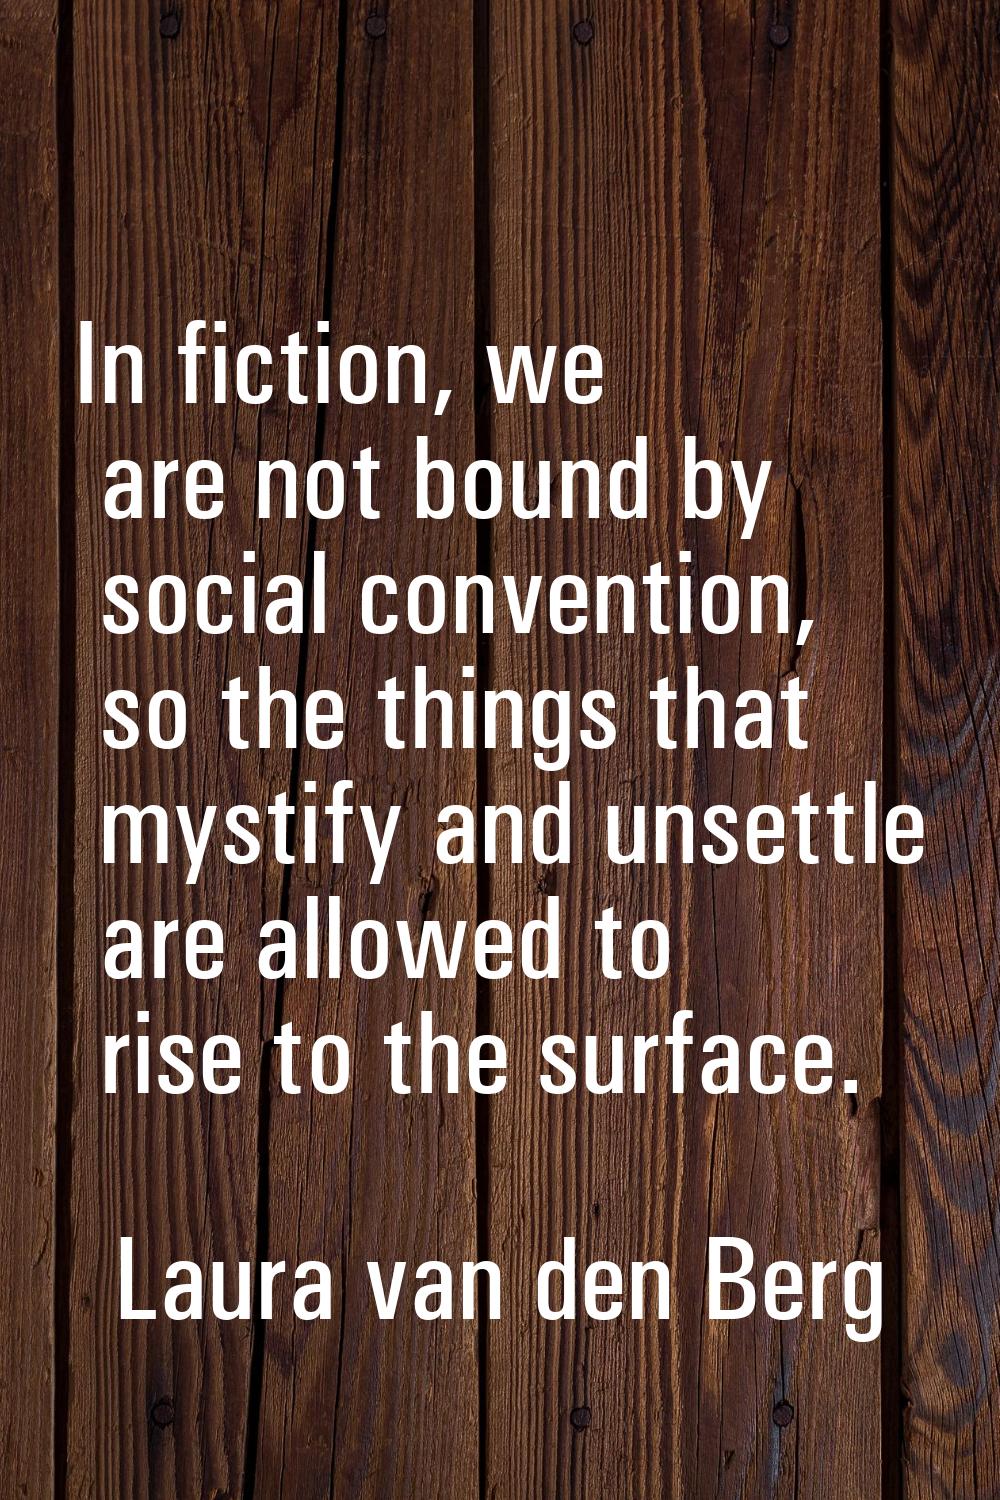 In fiction, we are not bound by social convention, so the things that mystify and unsettle are allo